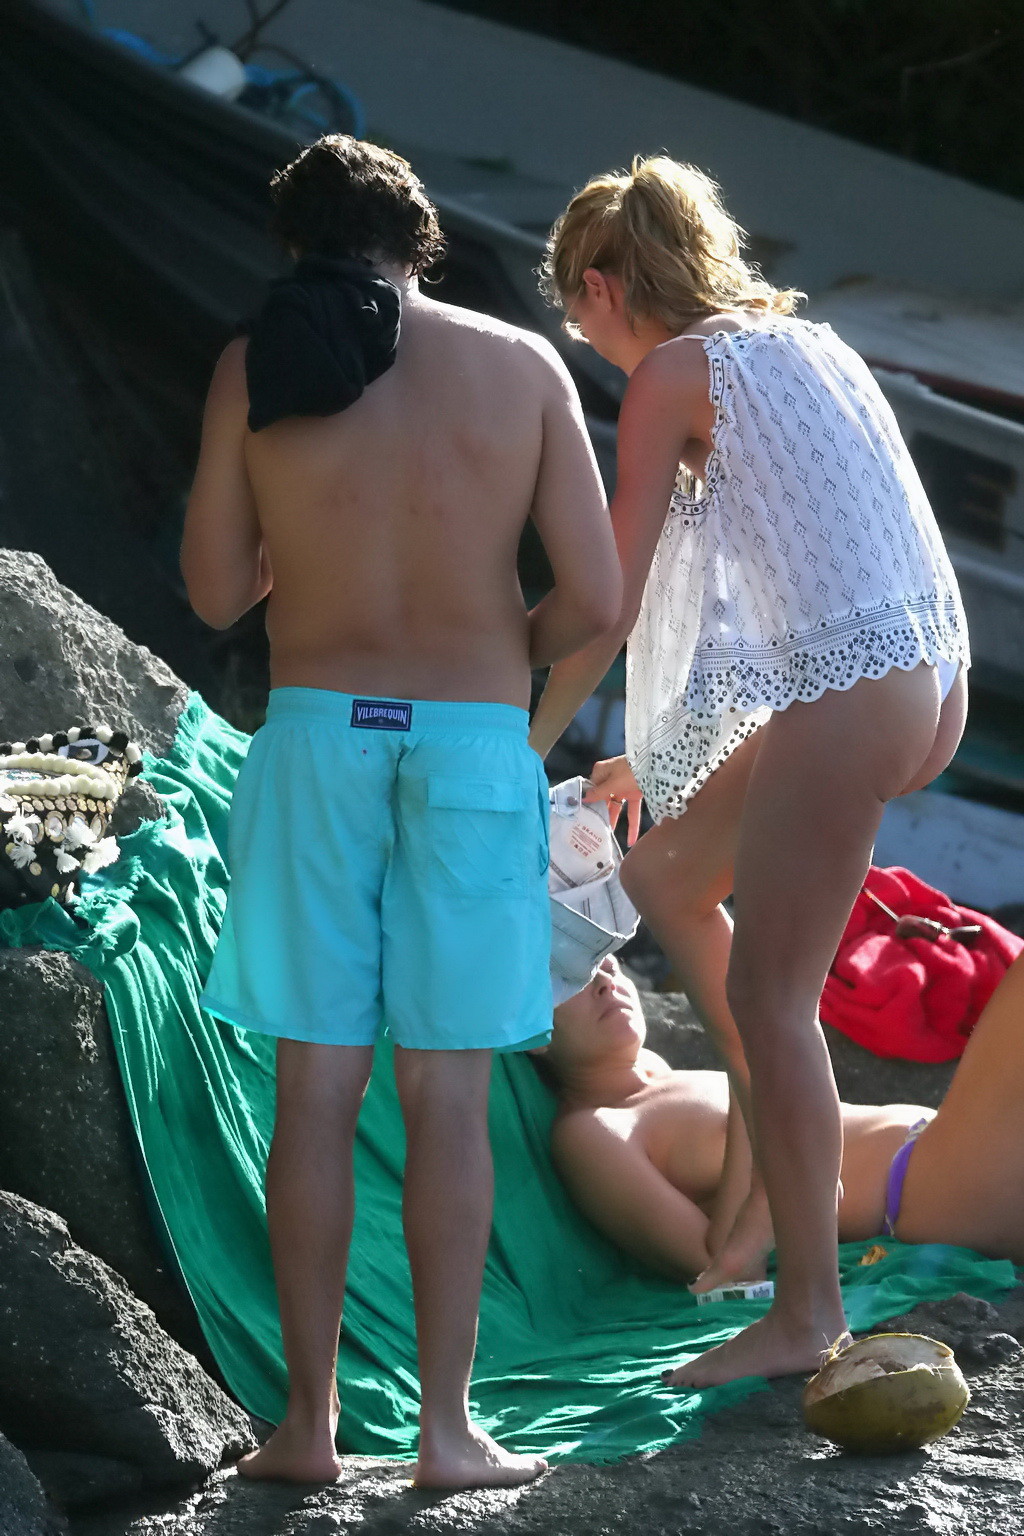 Heidi Klum caught topless in a white thong during a vacation in StBarts #75177362